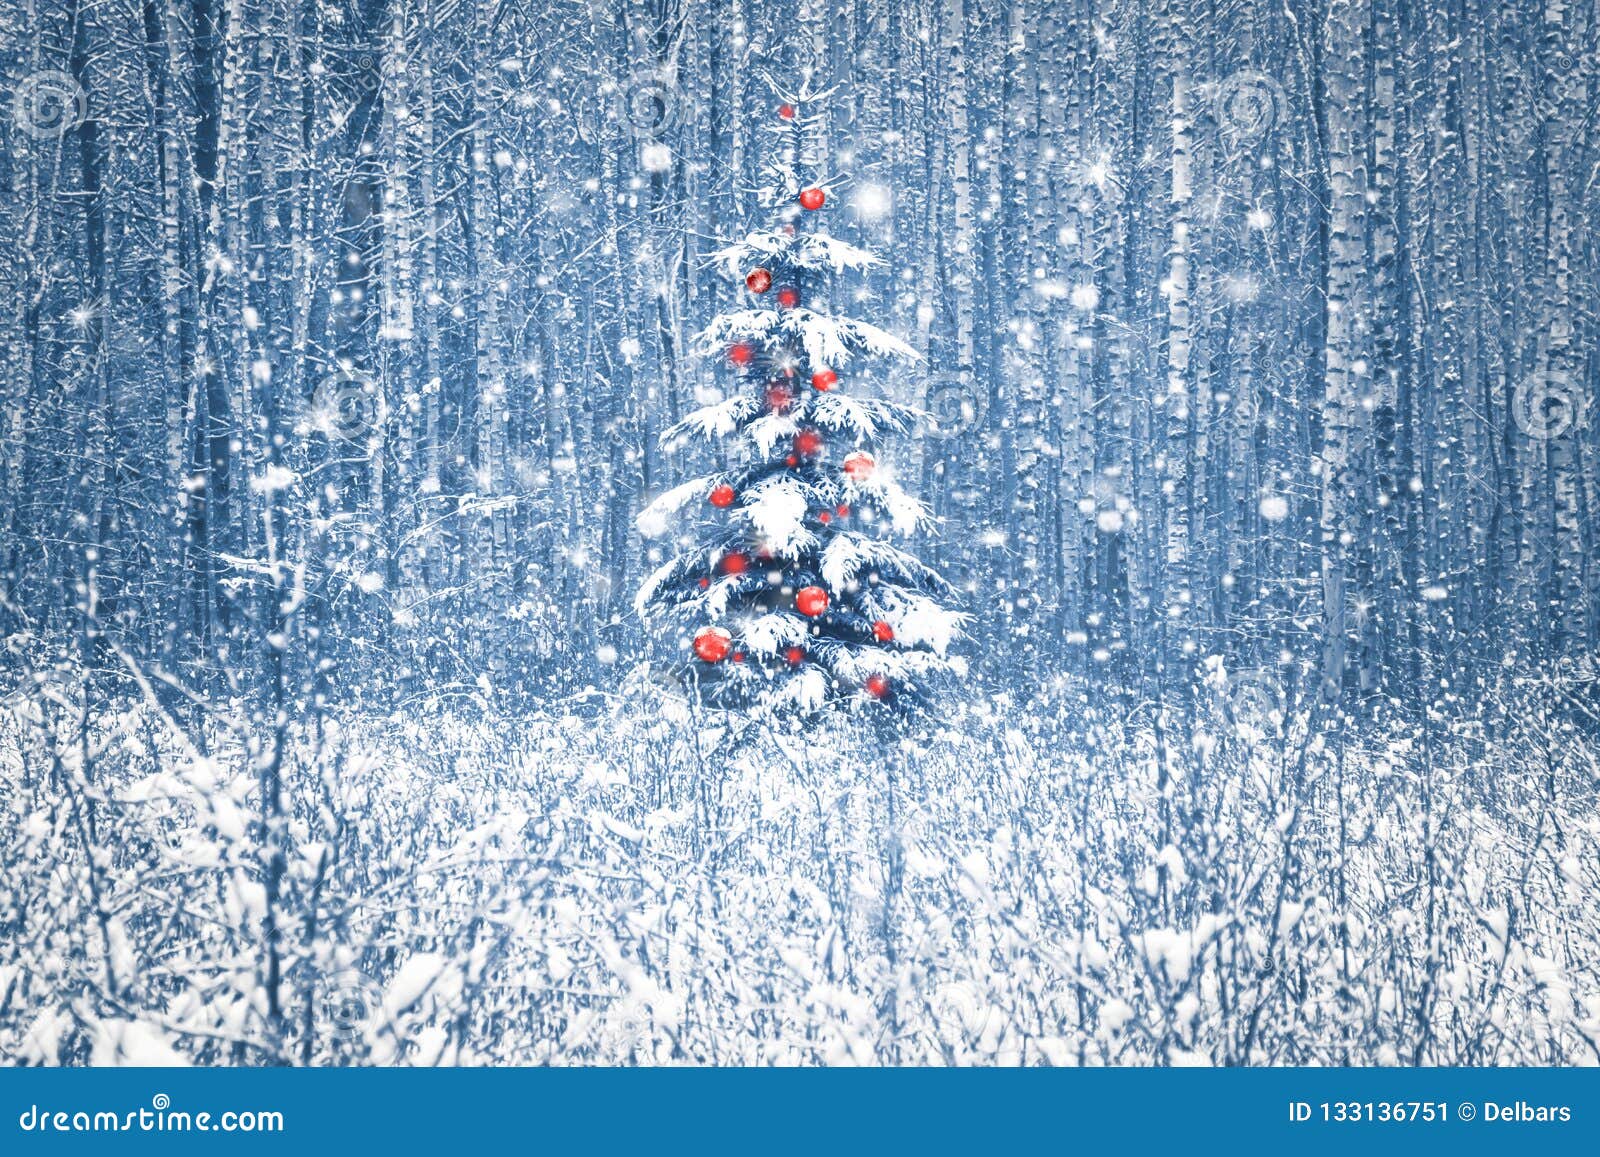 lonely blue spruce with red christmas decorations in a snowy winter forest.